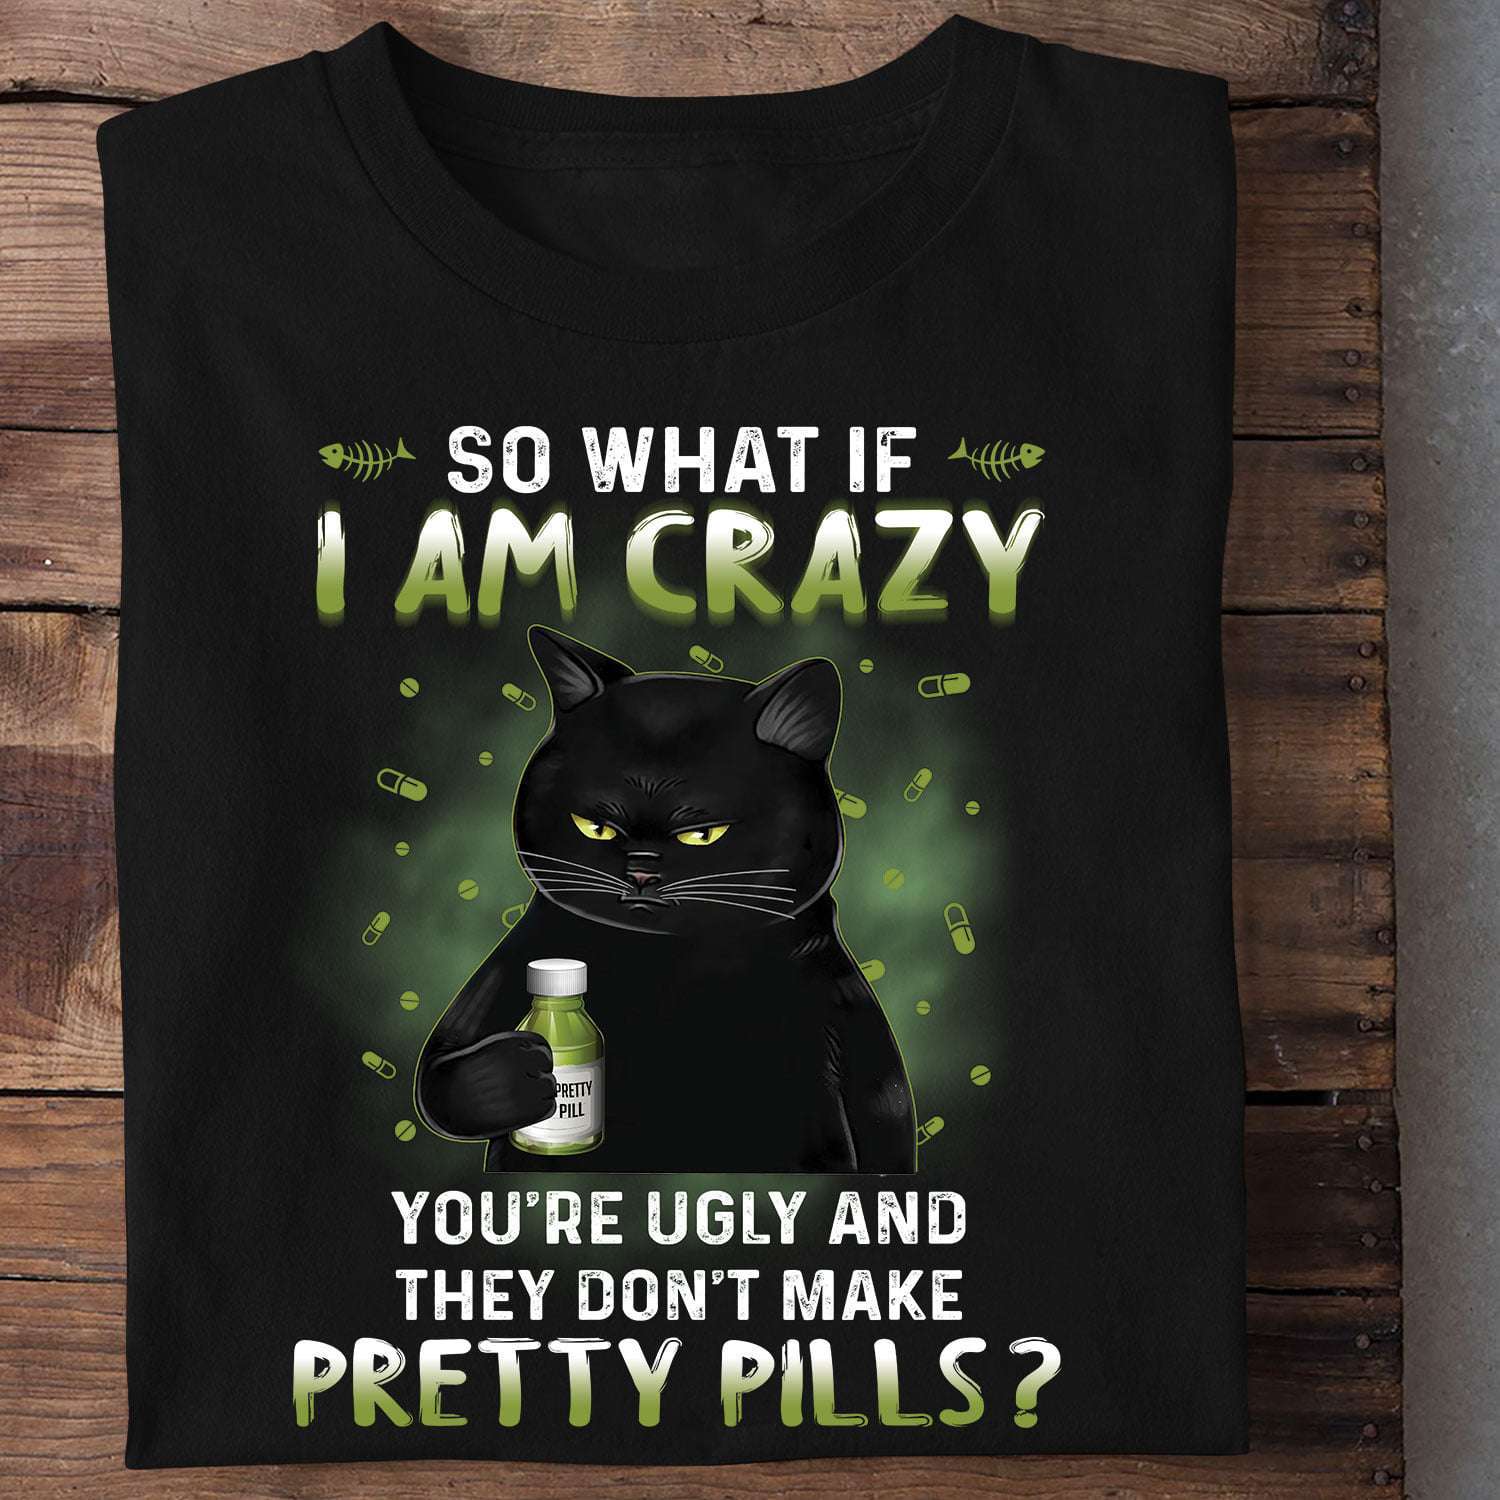 Black Cat And Pretty Pills - So what if i am crazy you're ugly and they don't make pretty pills?